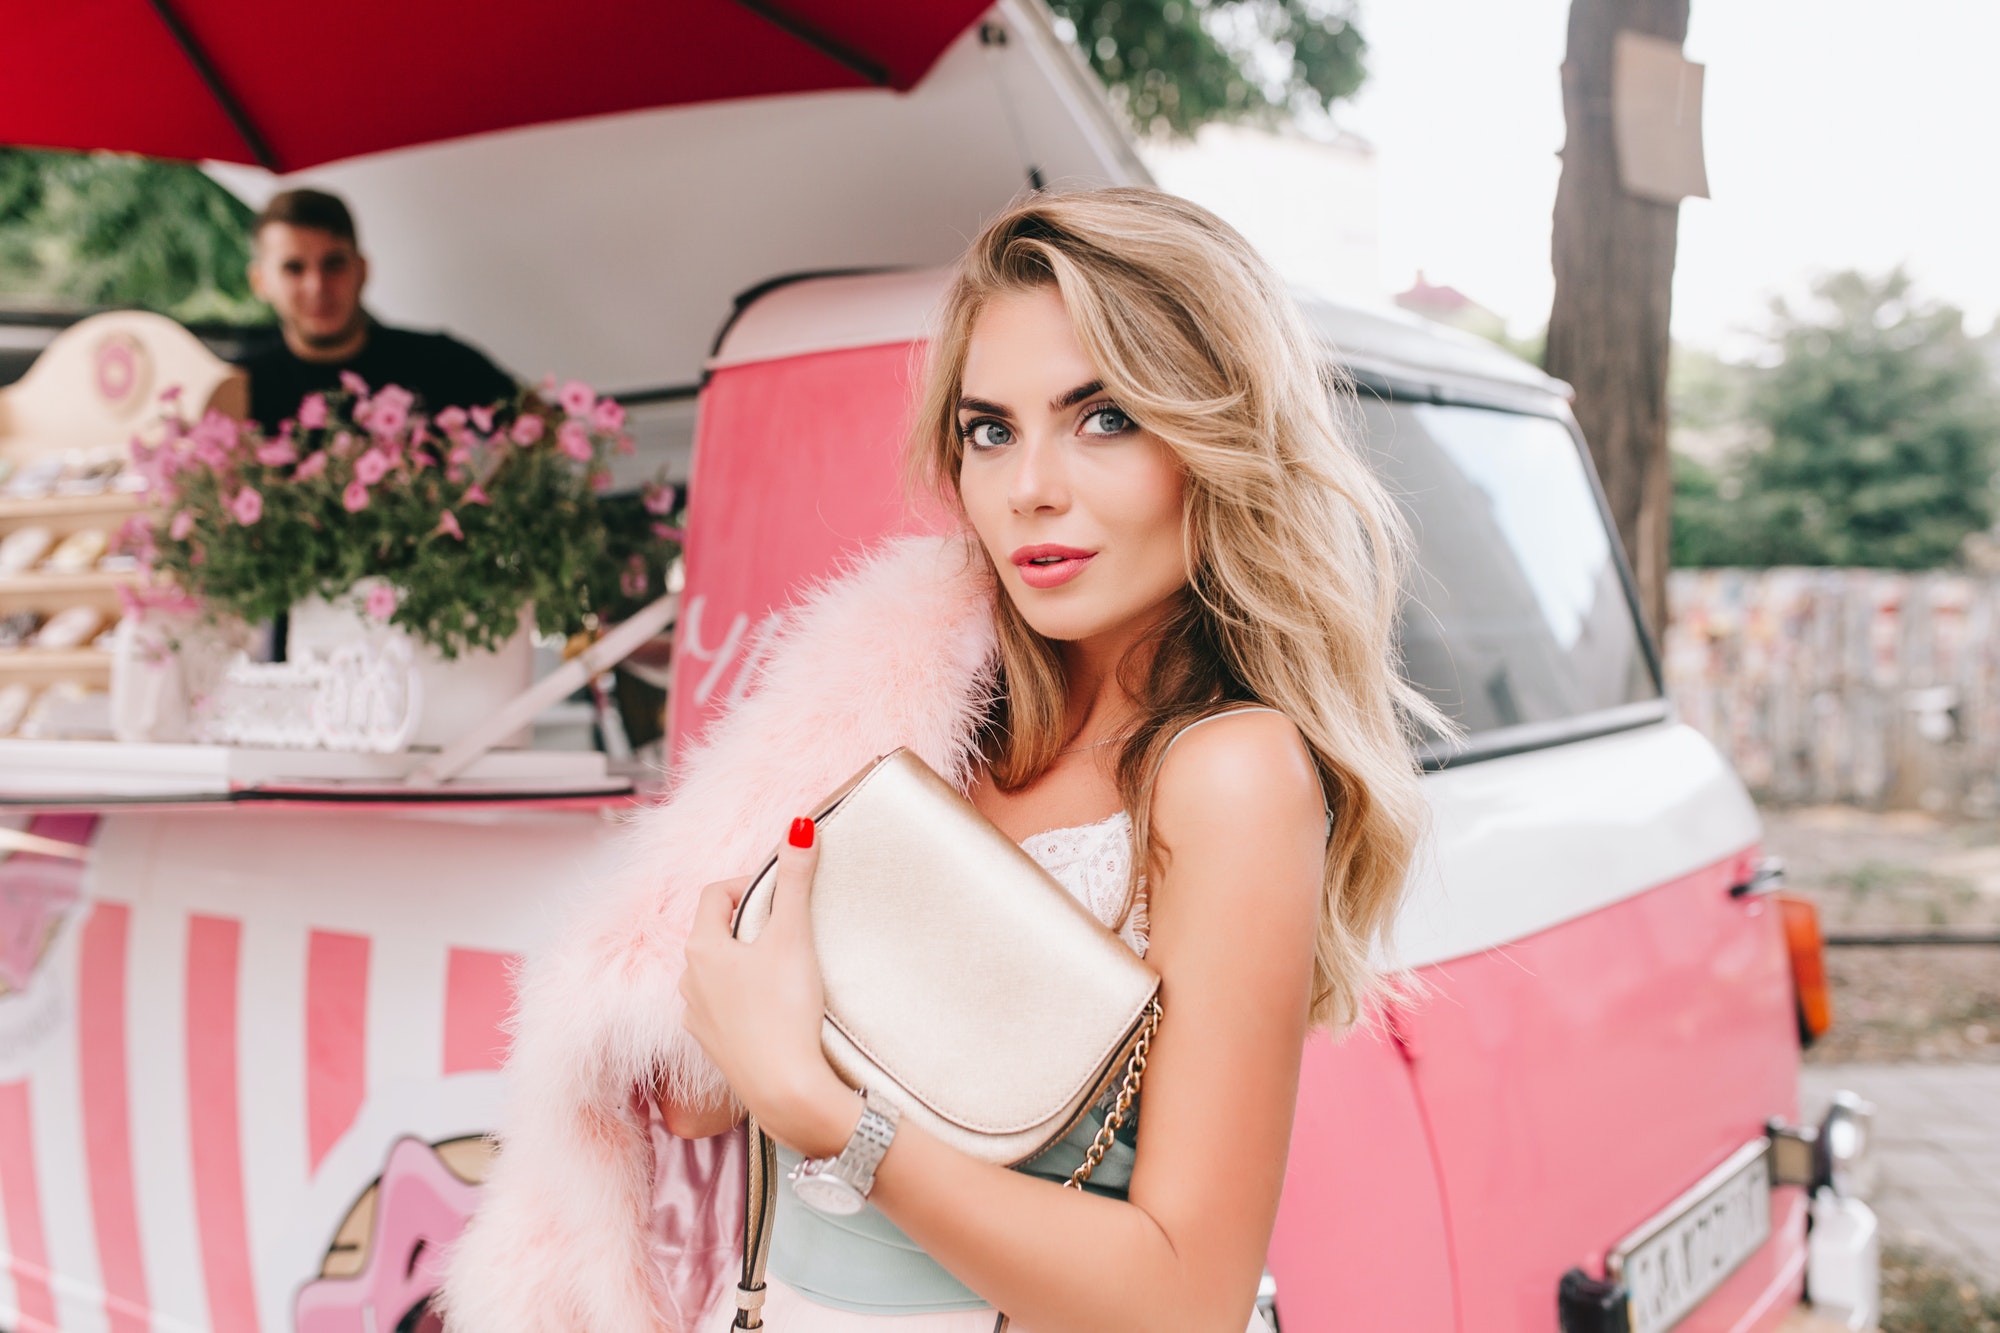 Portrait of fashion model with long blonde hair on retro coffee car background. She holds pink fur s